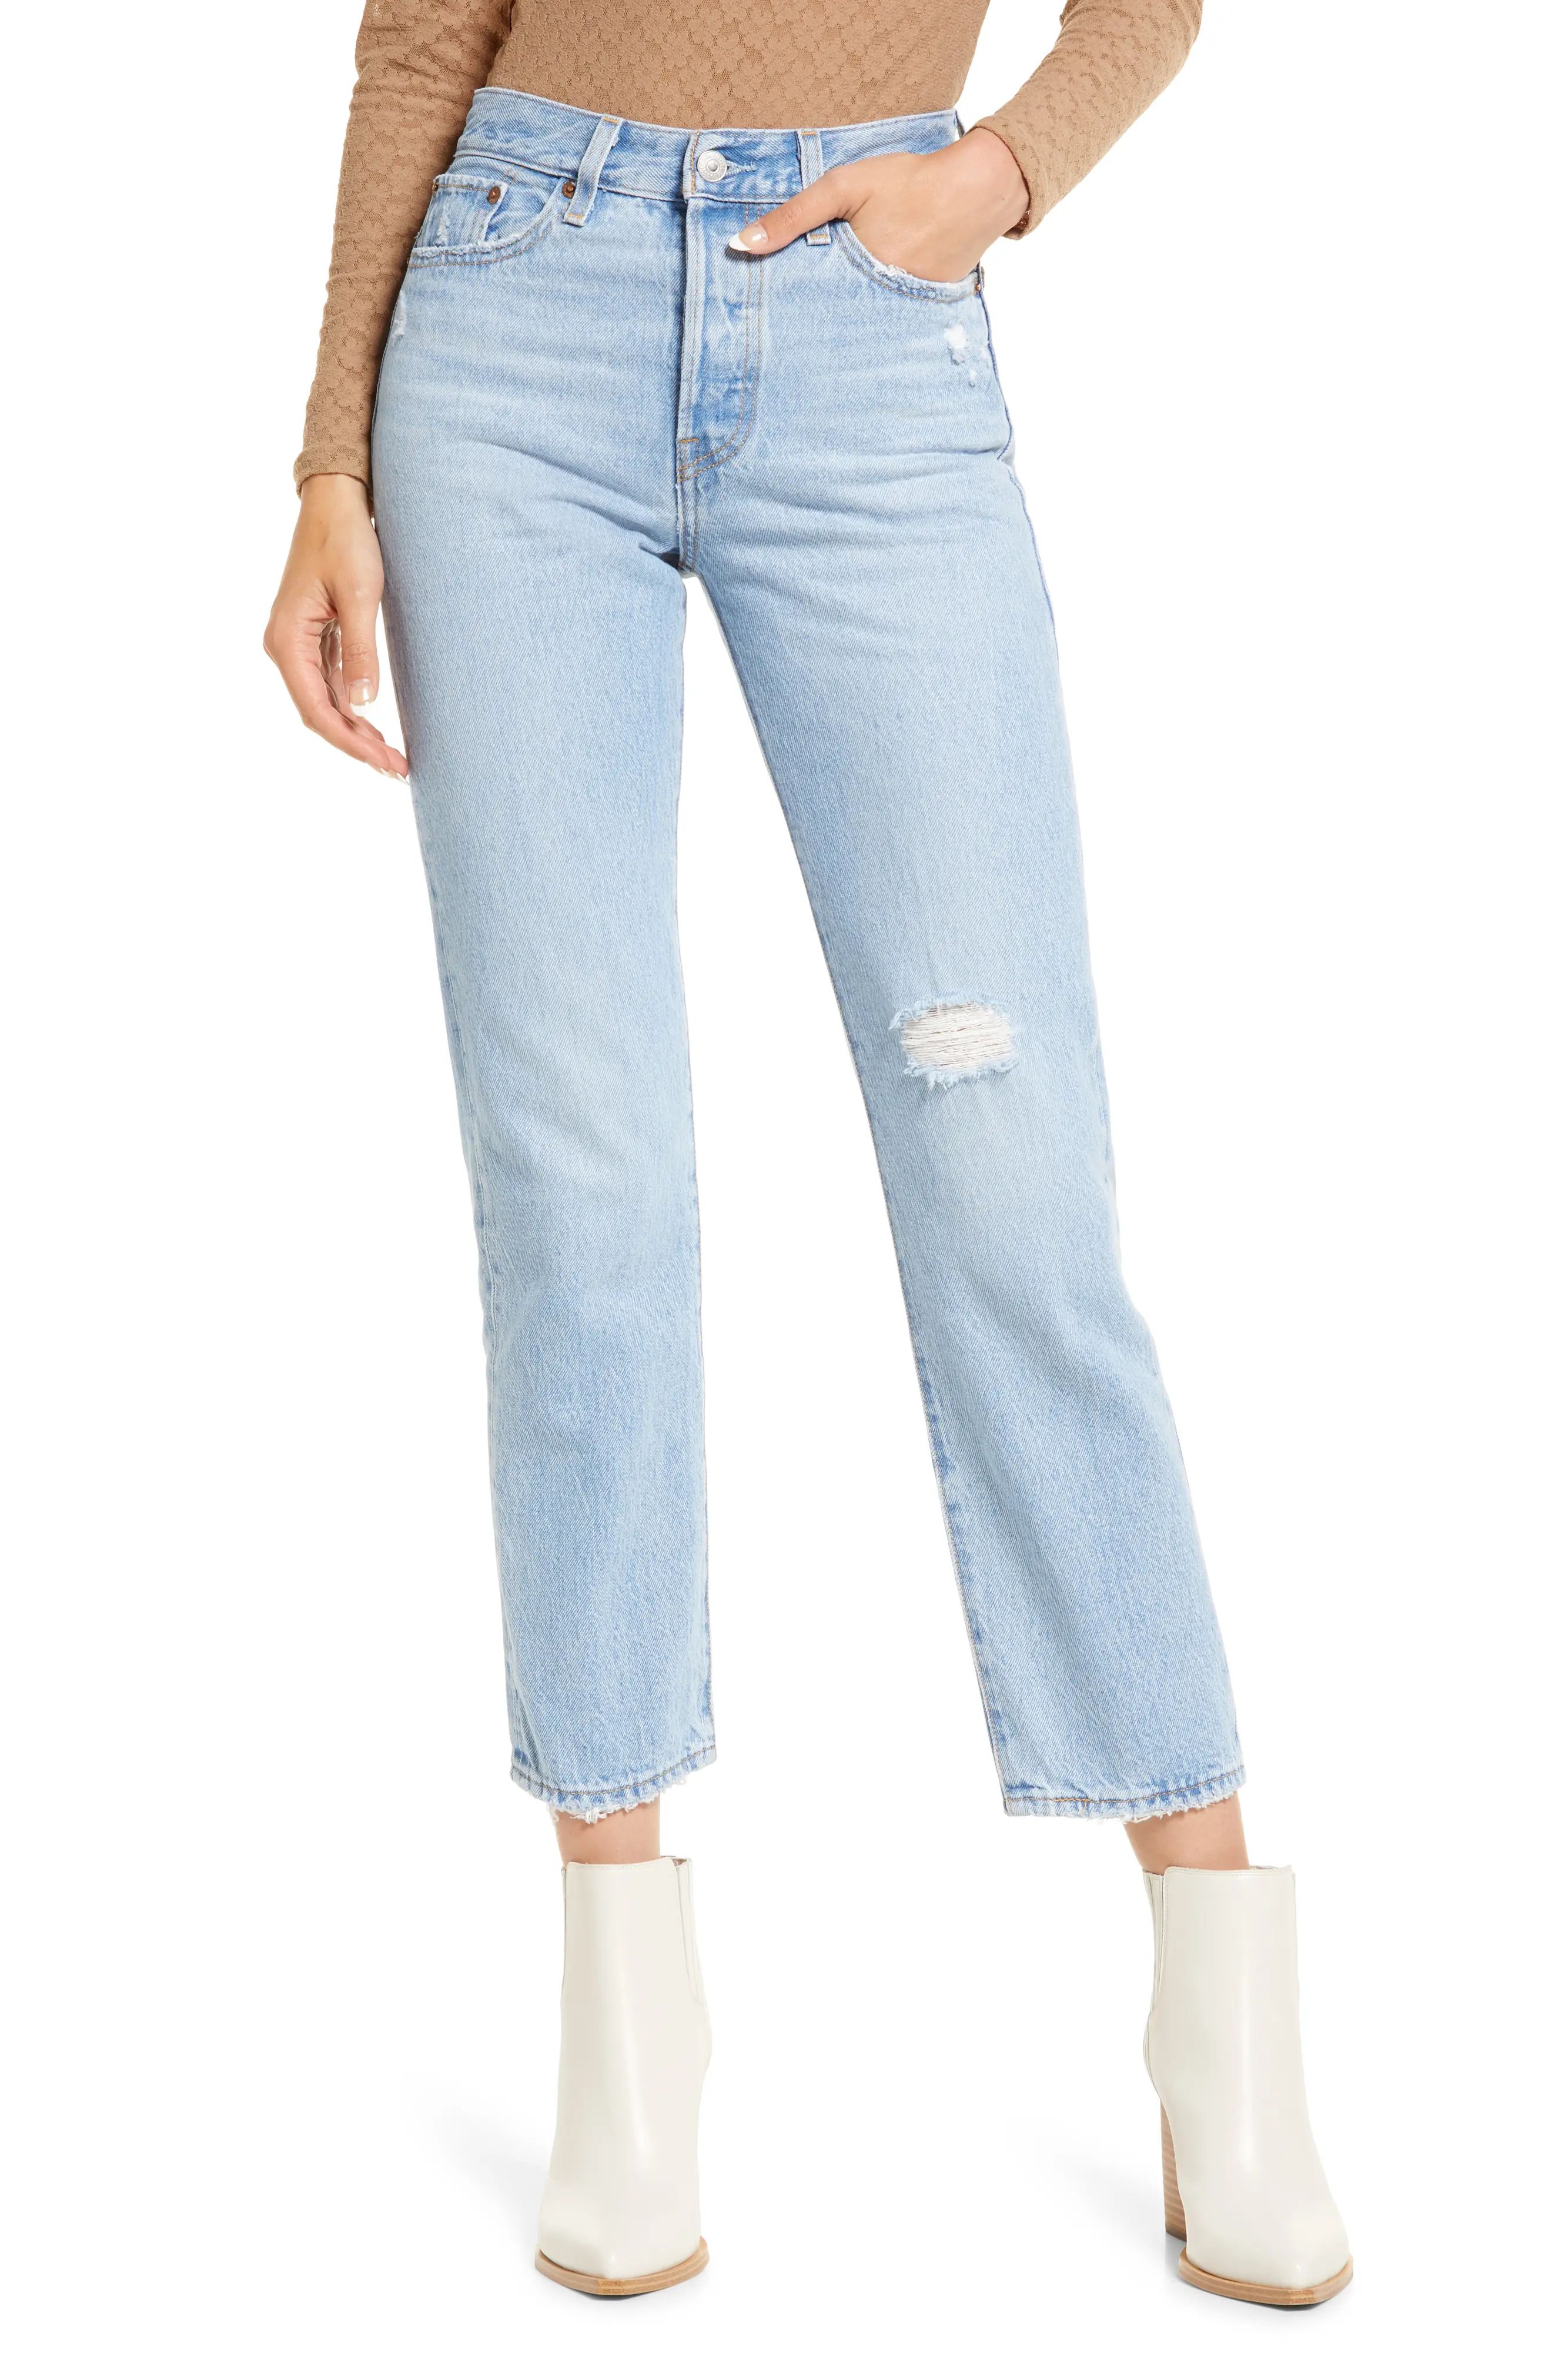 levi's Women's Wedgie Ripped High Waist Straight Leg Jeans, Size 28 X 28 in Luxor Again at Nordstrom | Nordstrom